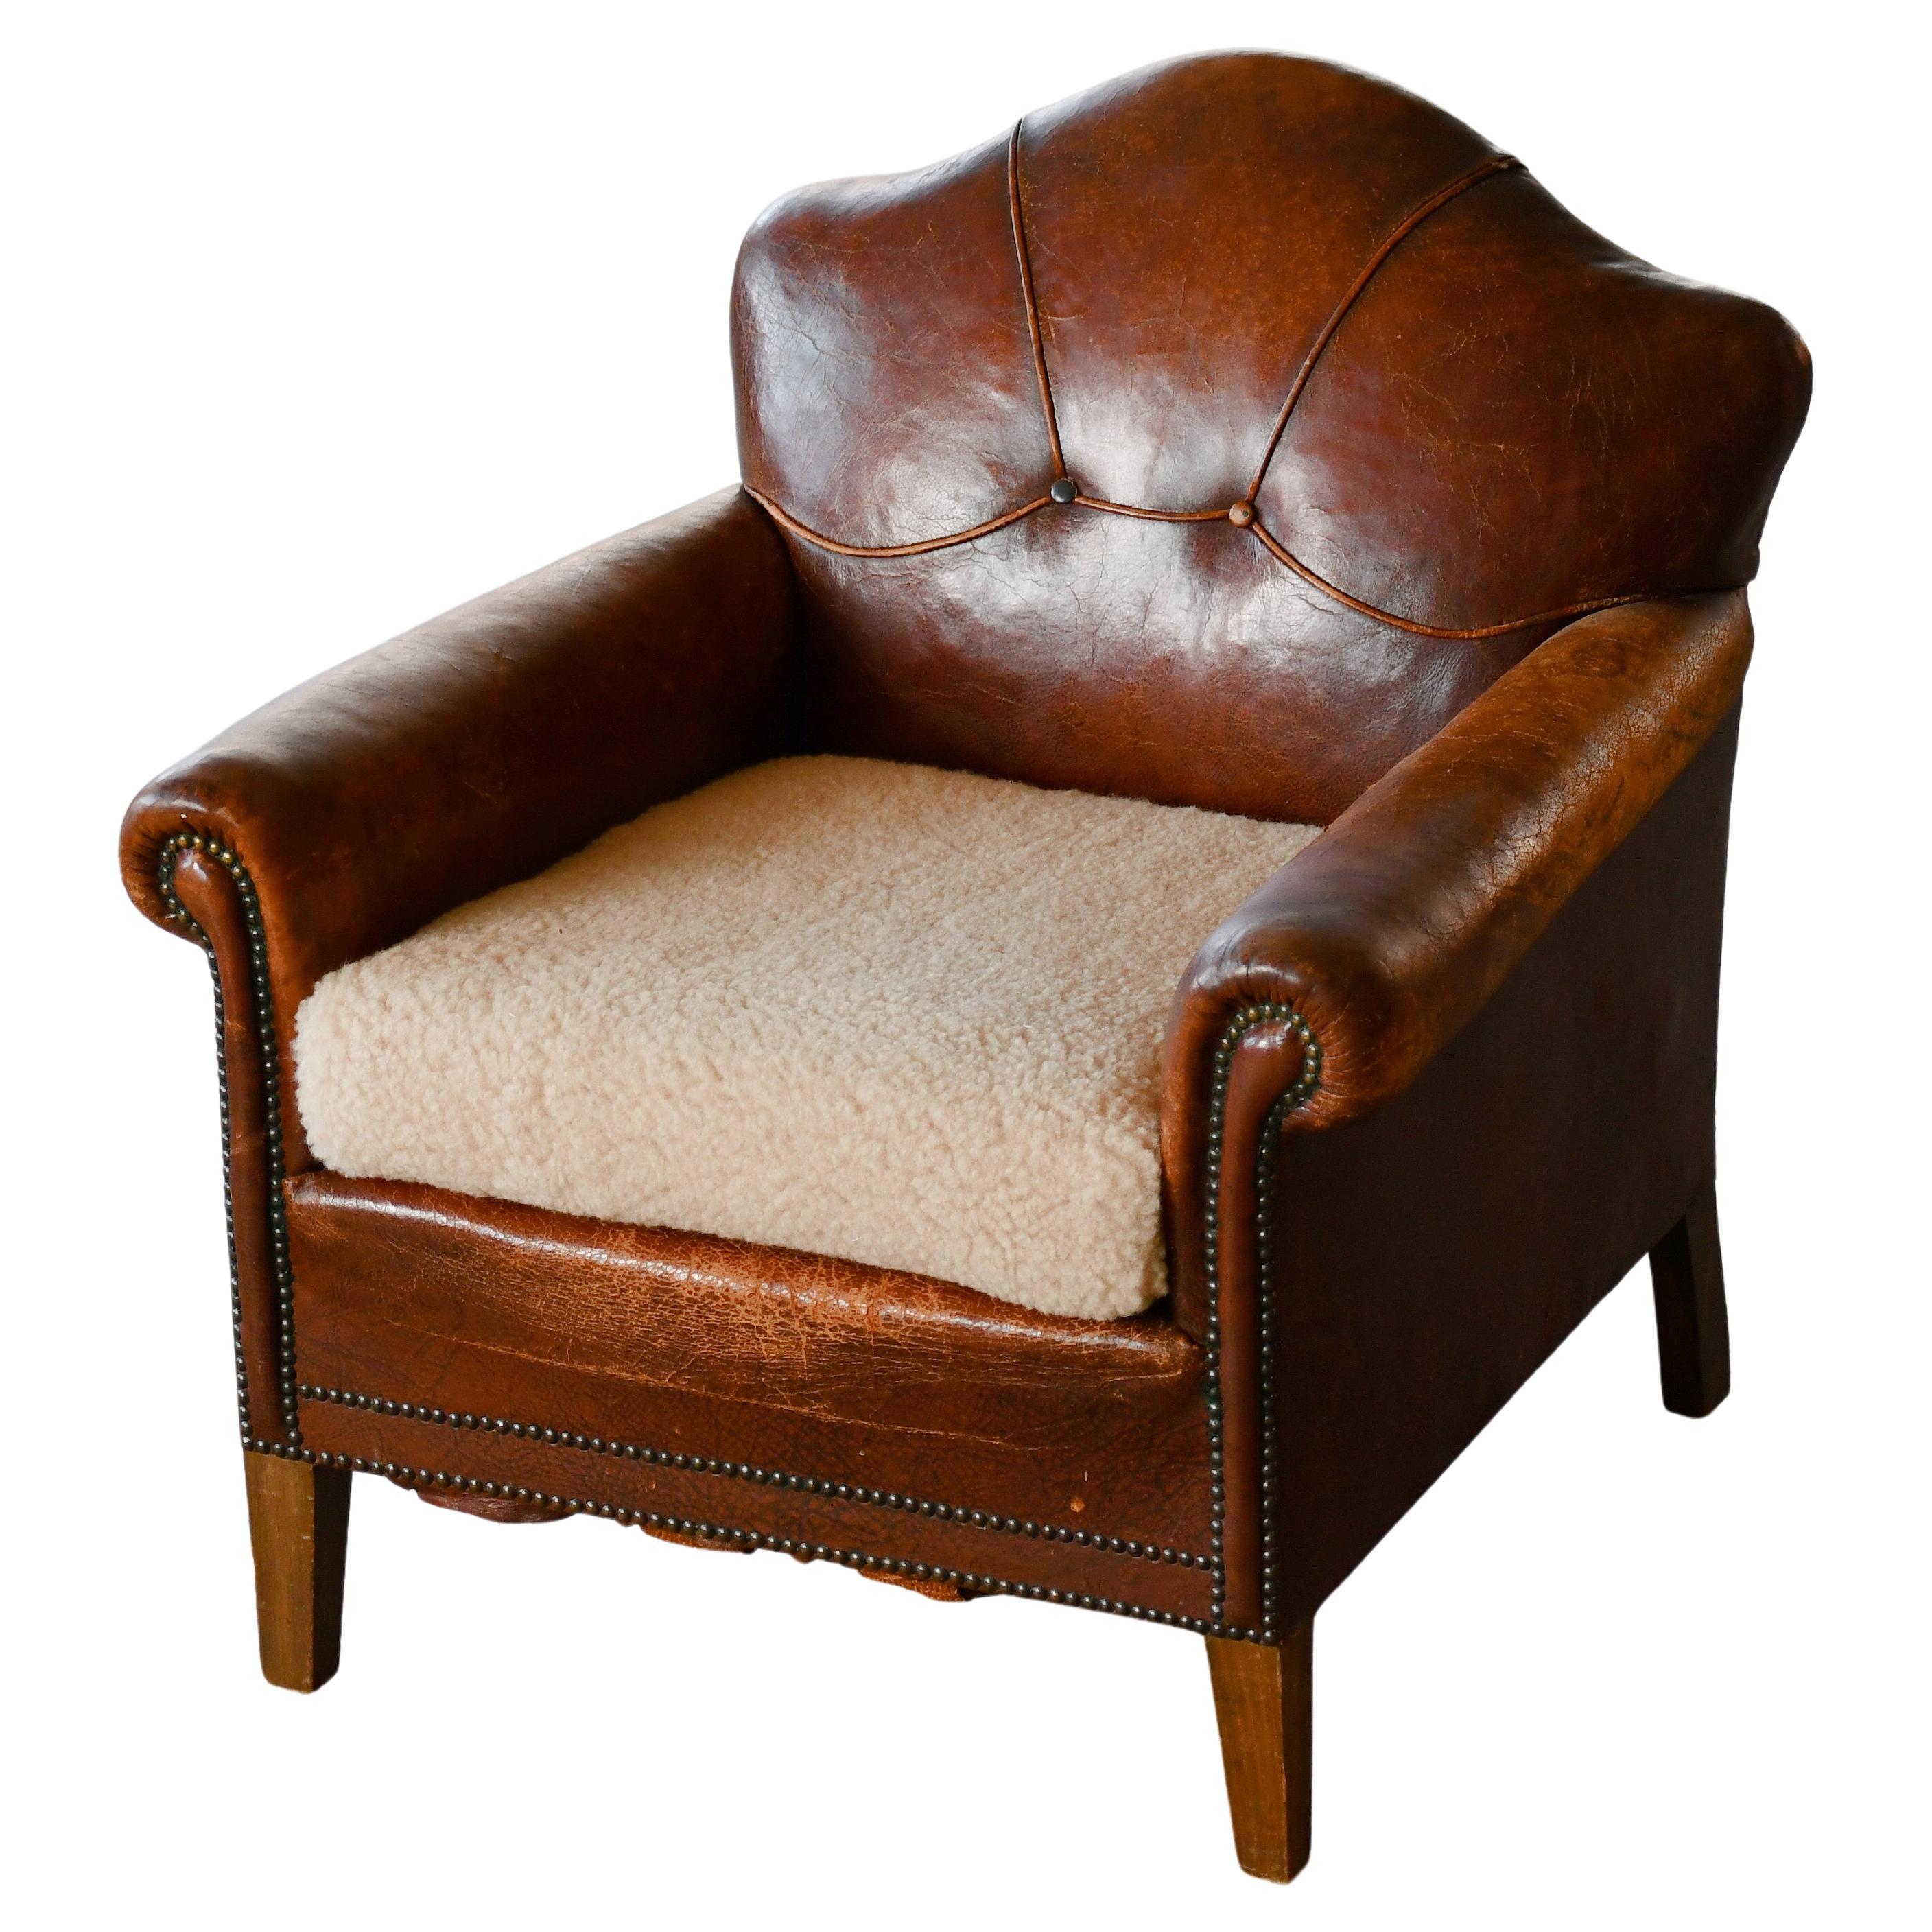 1940s Danish Small Club or Library Chair in Brown Leather